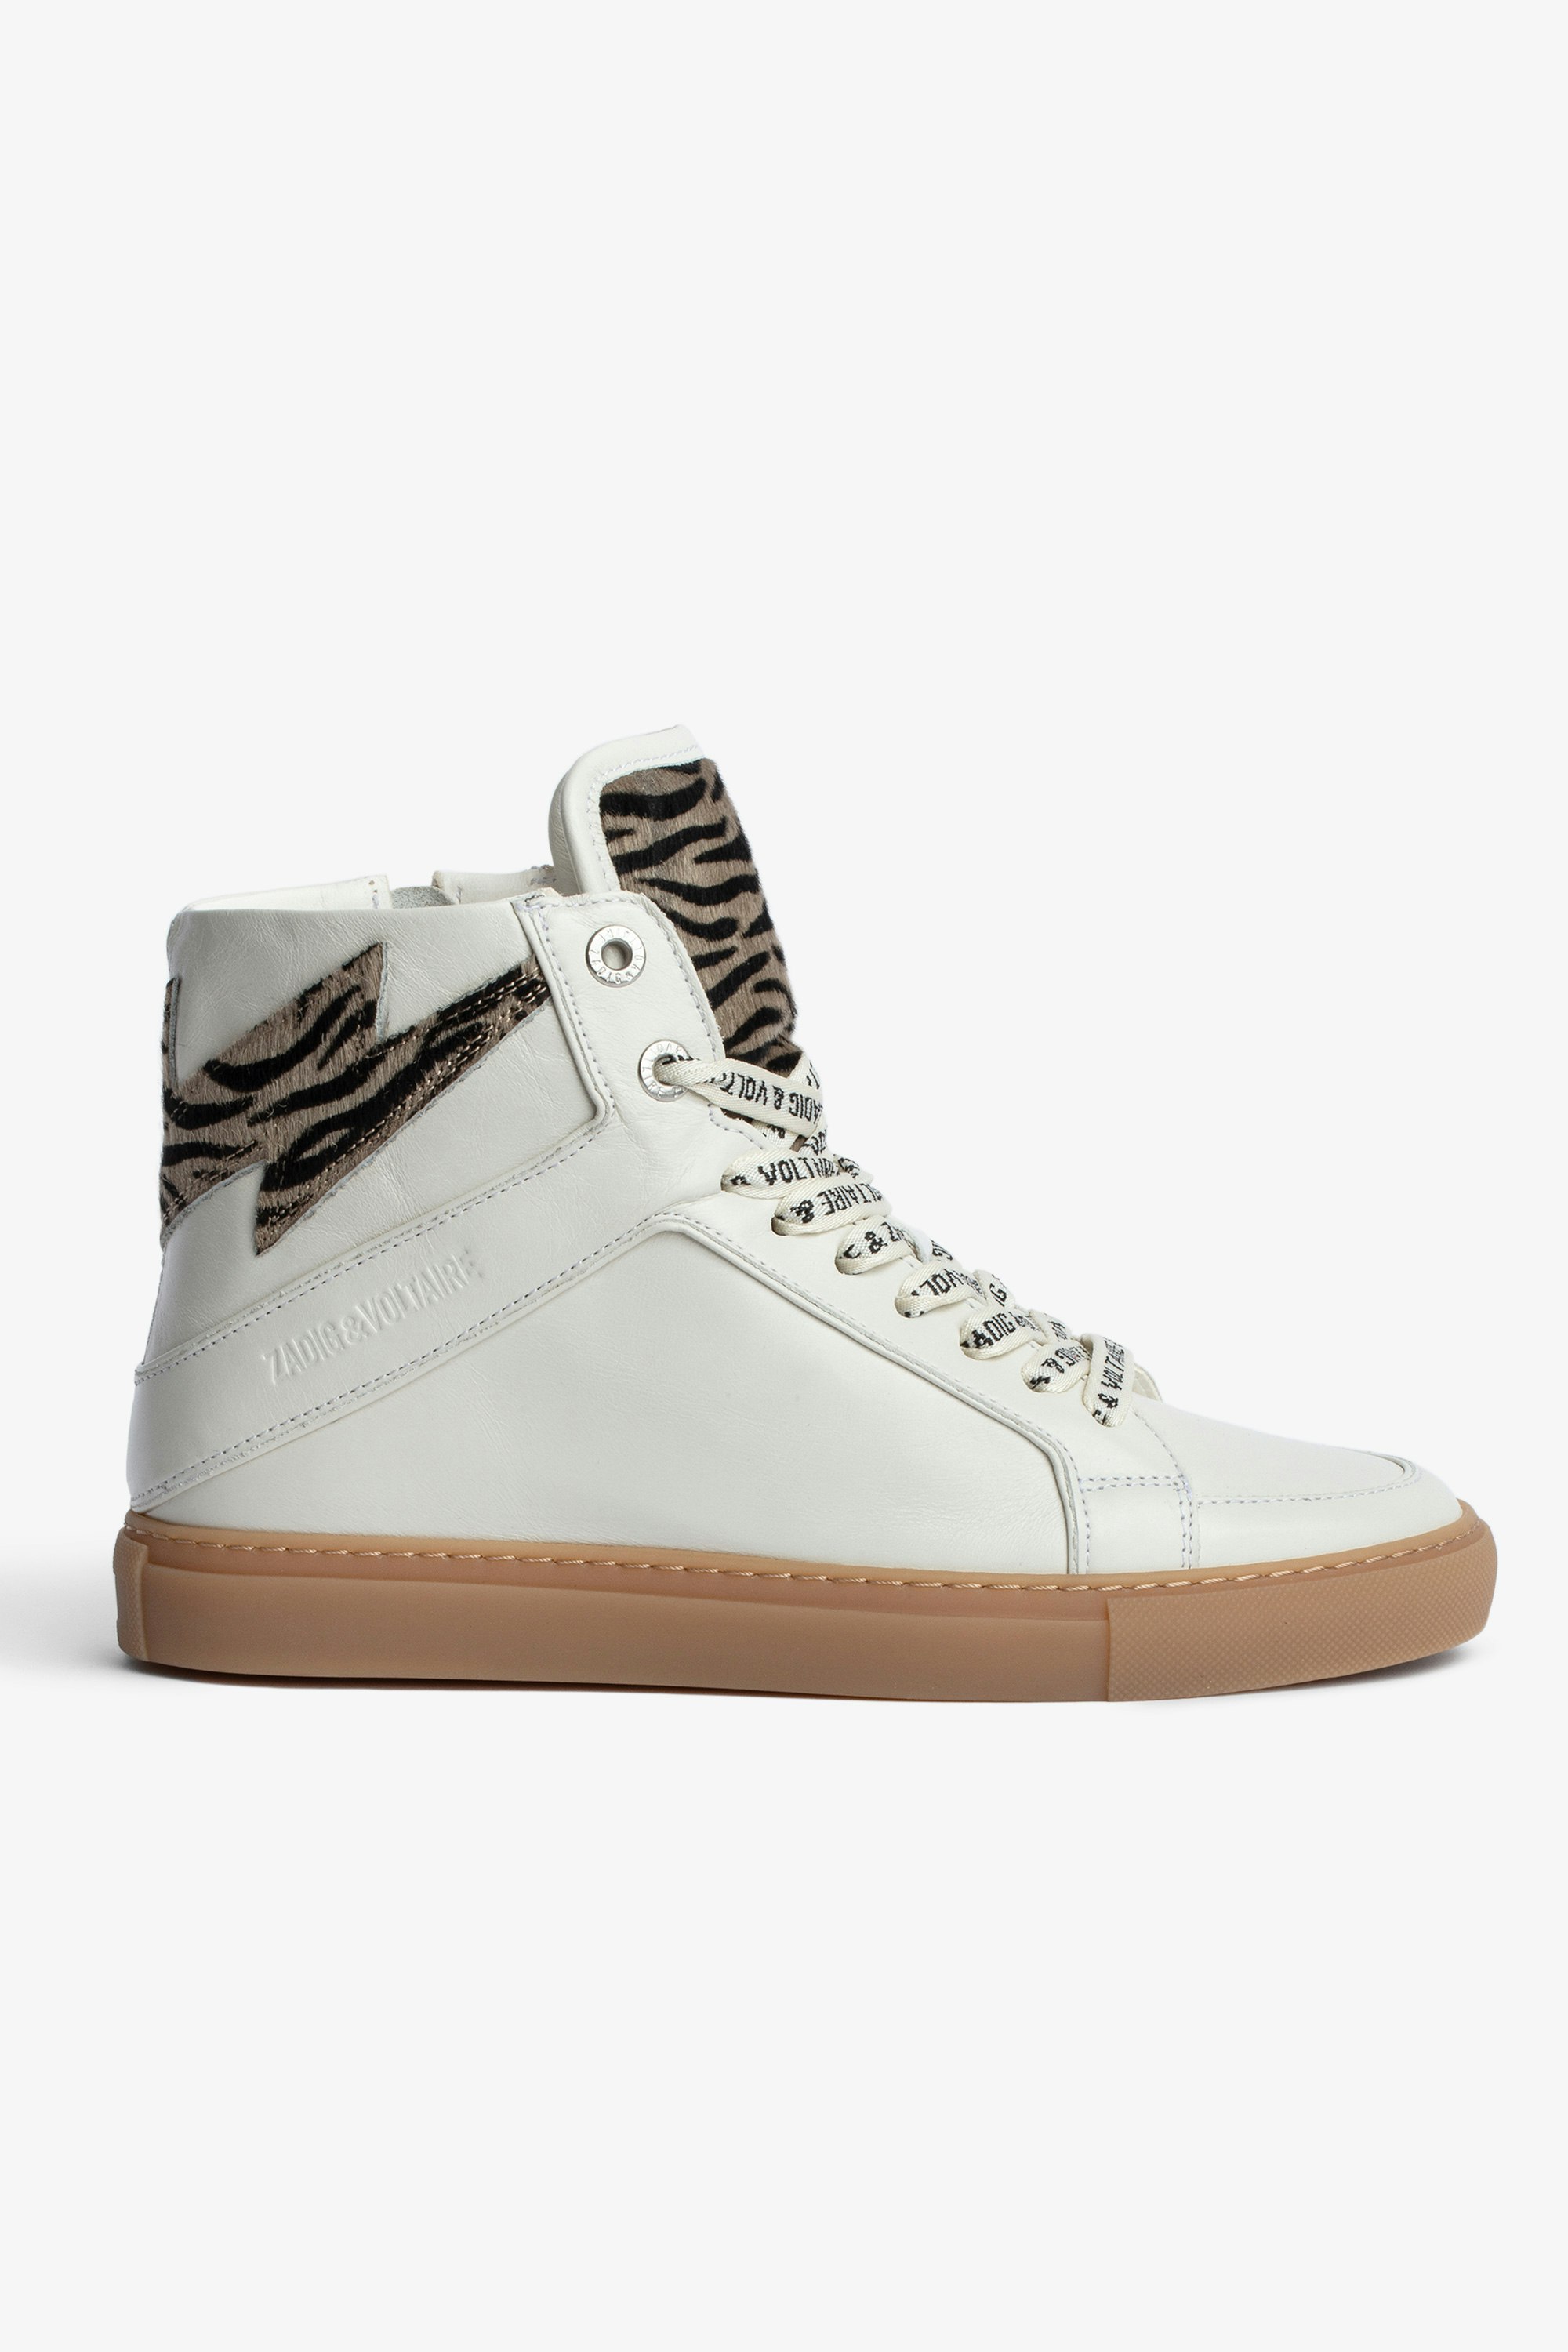 ZV1747 High Flash スニーカー Women’s white leather high-top sneakers with zebra-print panels